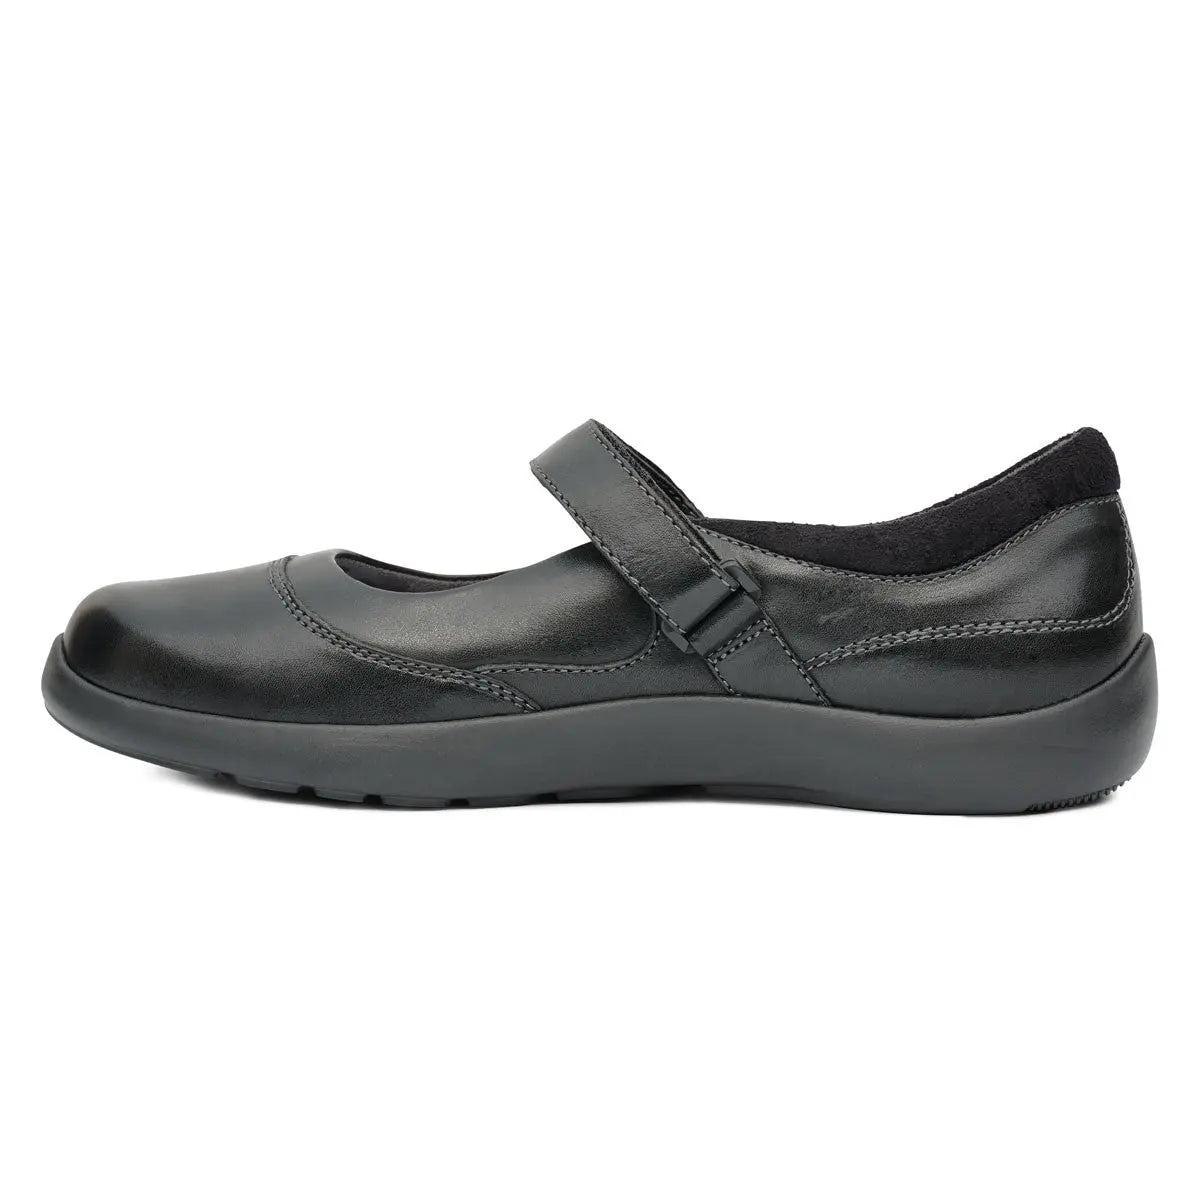 Diabetic Casual Mary Jane Shoe for Women, Black - Left Side Image | No. 19 | Anodyne